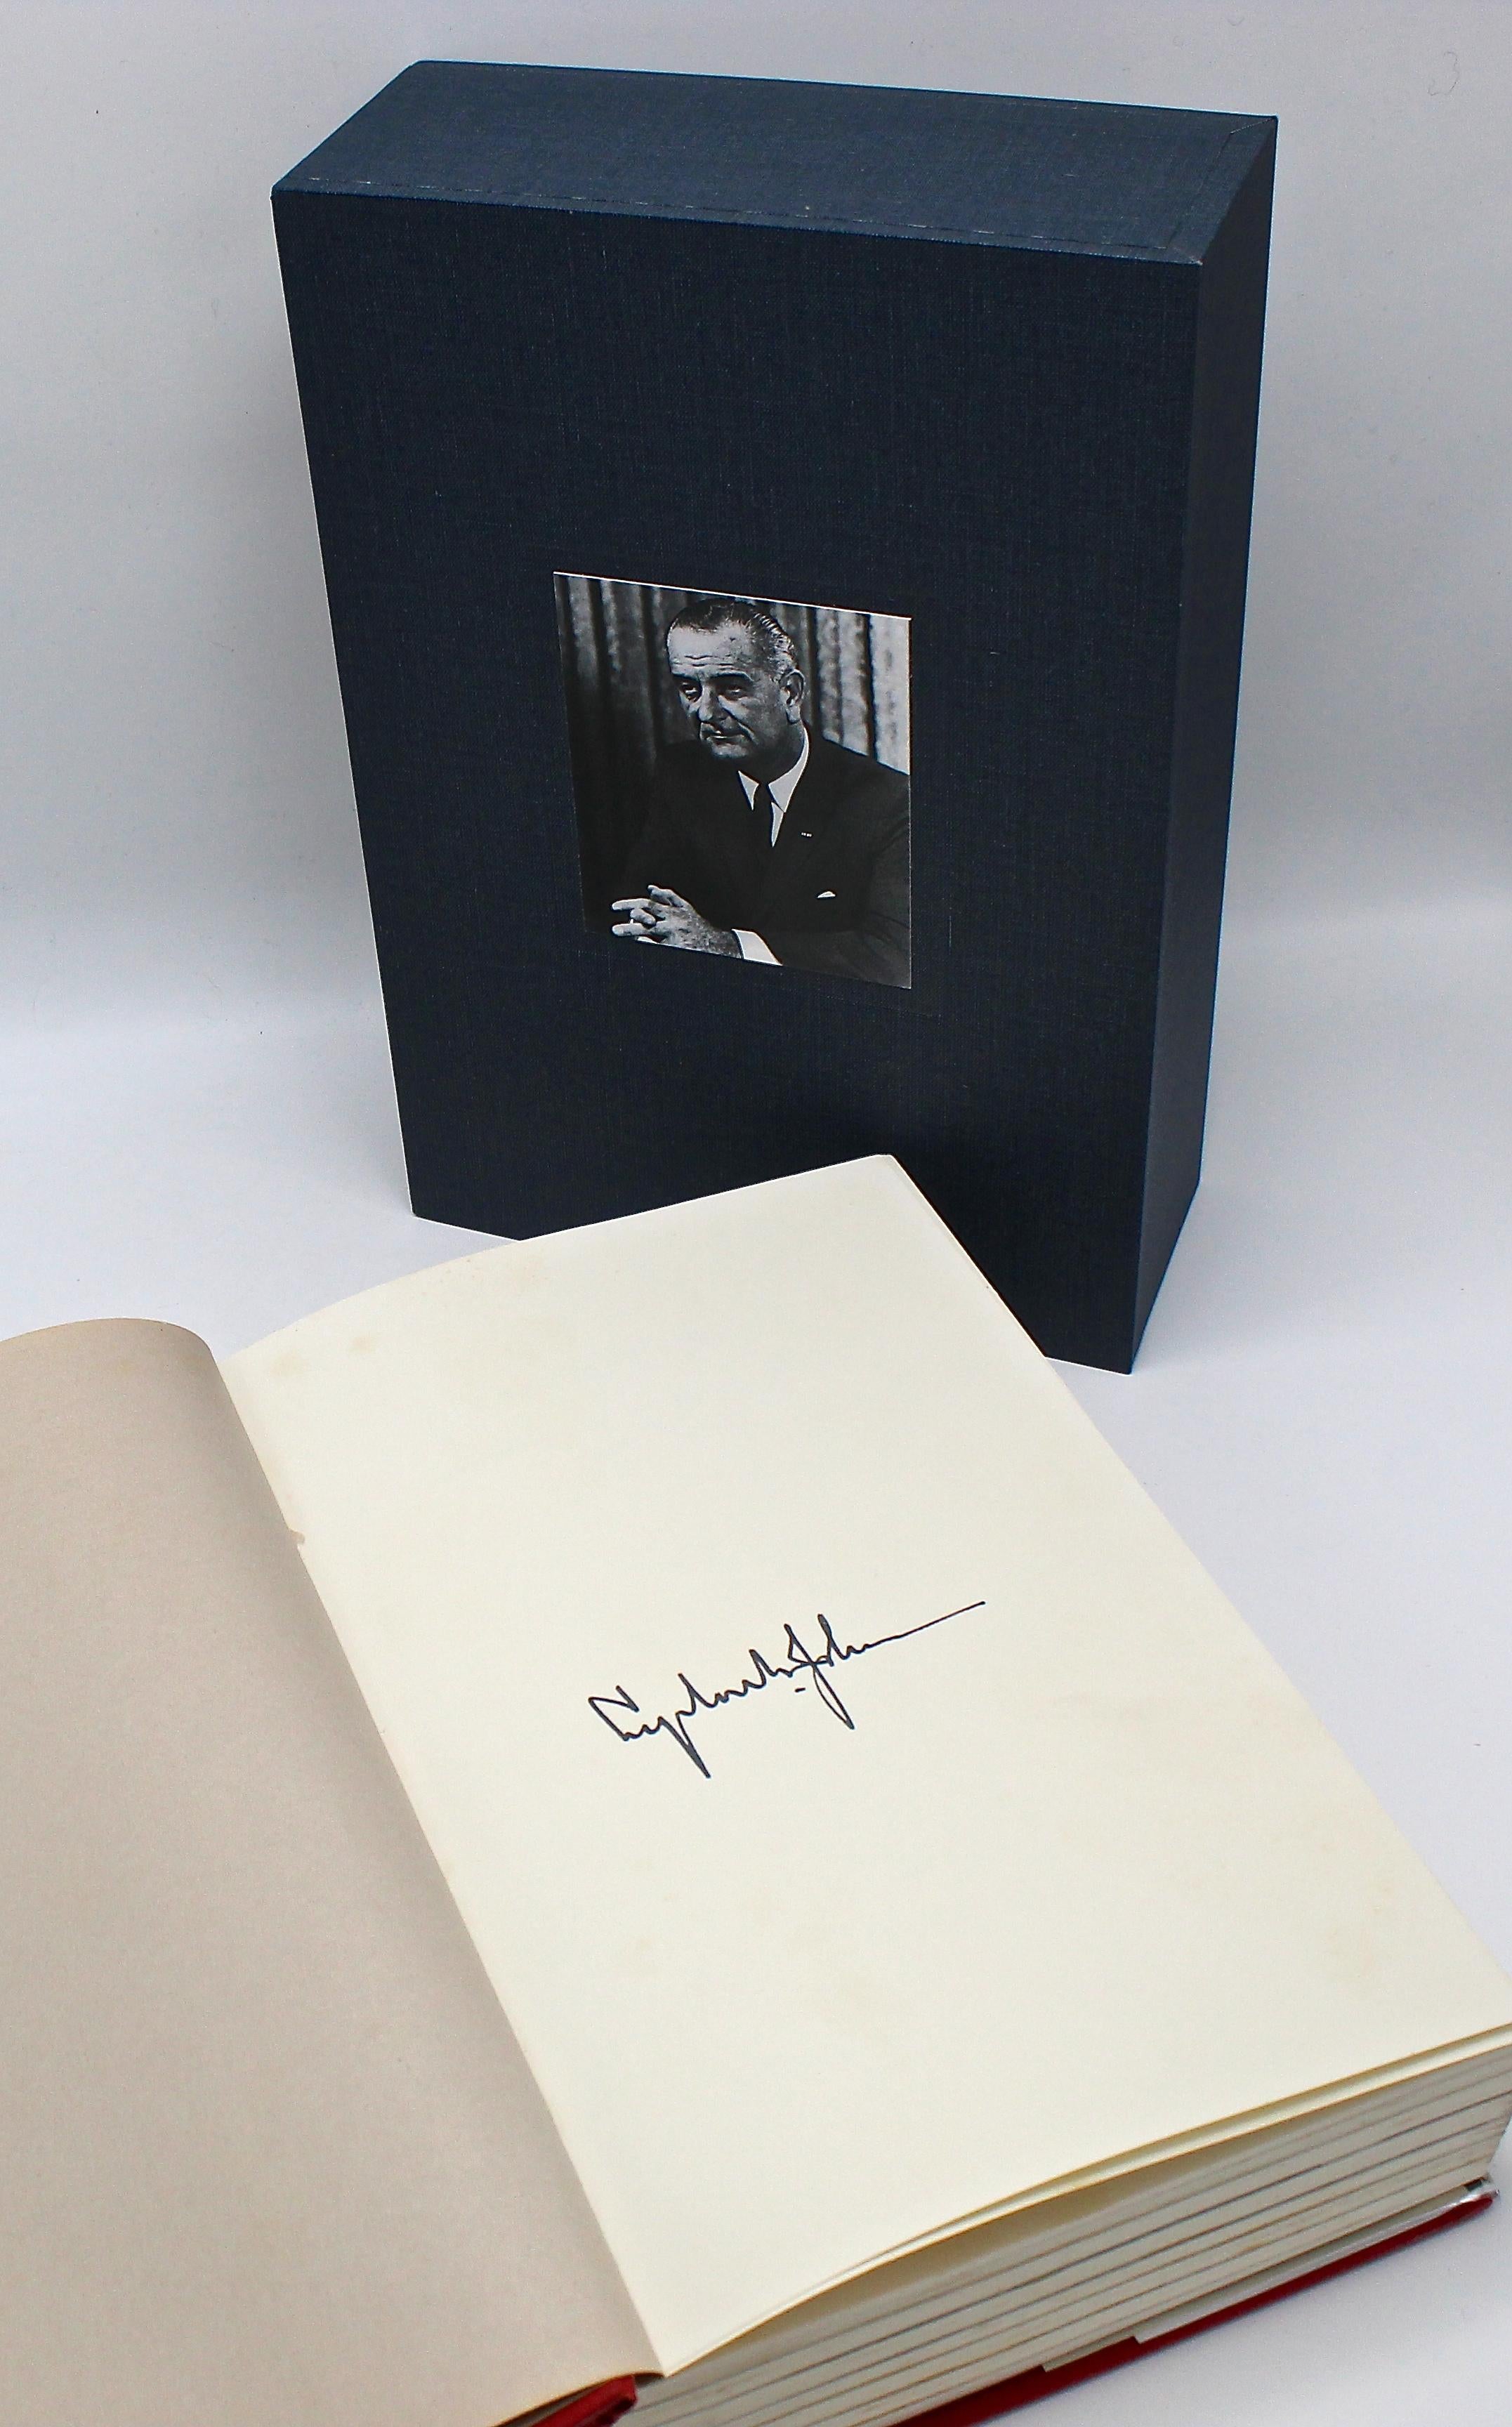 Johnson, Lyndon Baines, The Vantage Point: Perspectives of the Presidency 1963-1969. Holt, Rinchart, and Winston, 1971. Stated first edition, signed, black and white photographs. Original dust jacket.

Presented is the first edition of Lyndon Baines